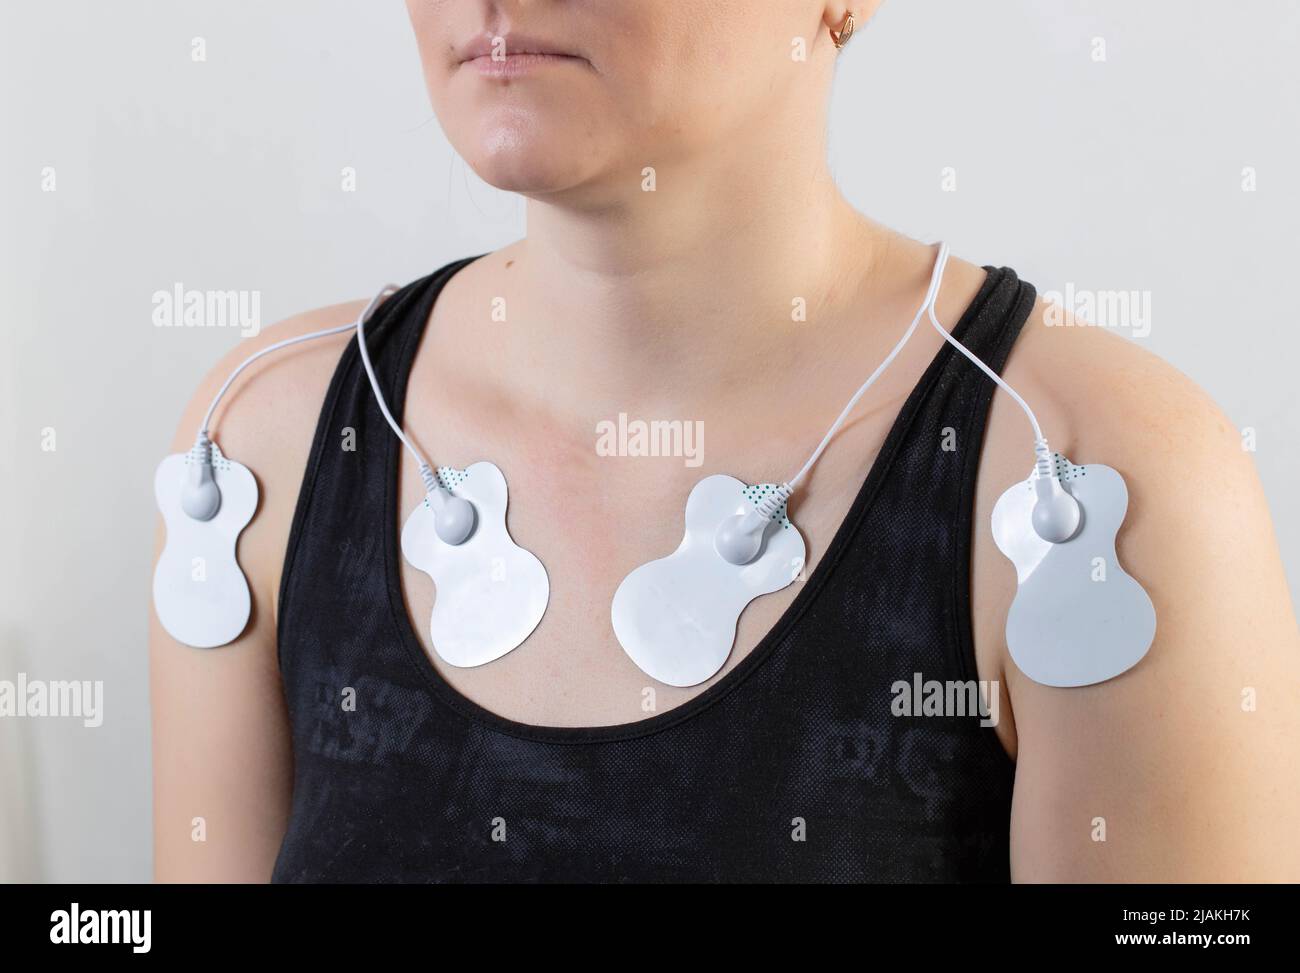 Treatment and relaxation of muscles on the human body with the help of an electronic apunctuator medical device. Skin massage, home physiotherapy. Stock Photo